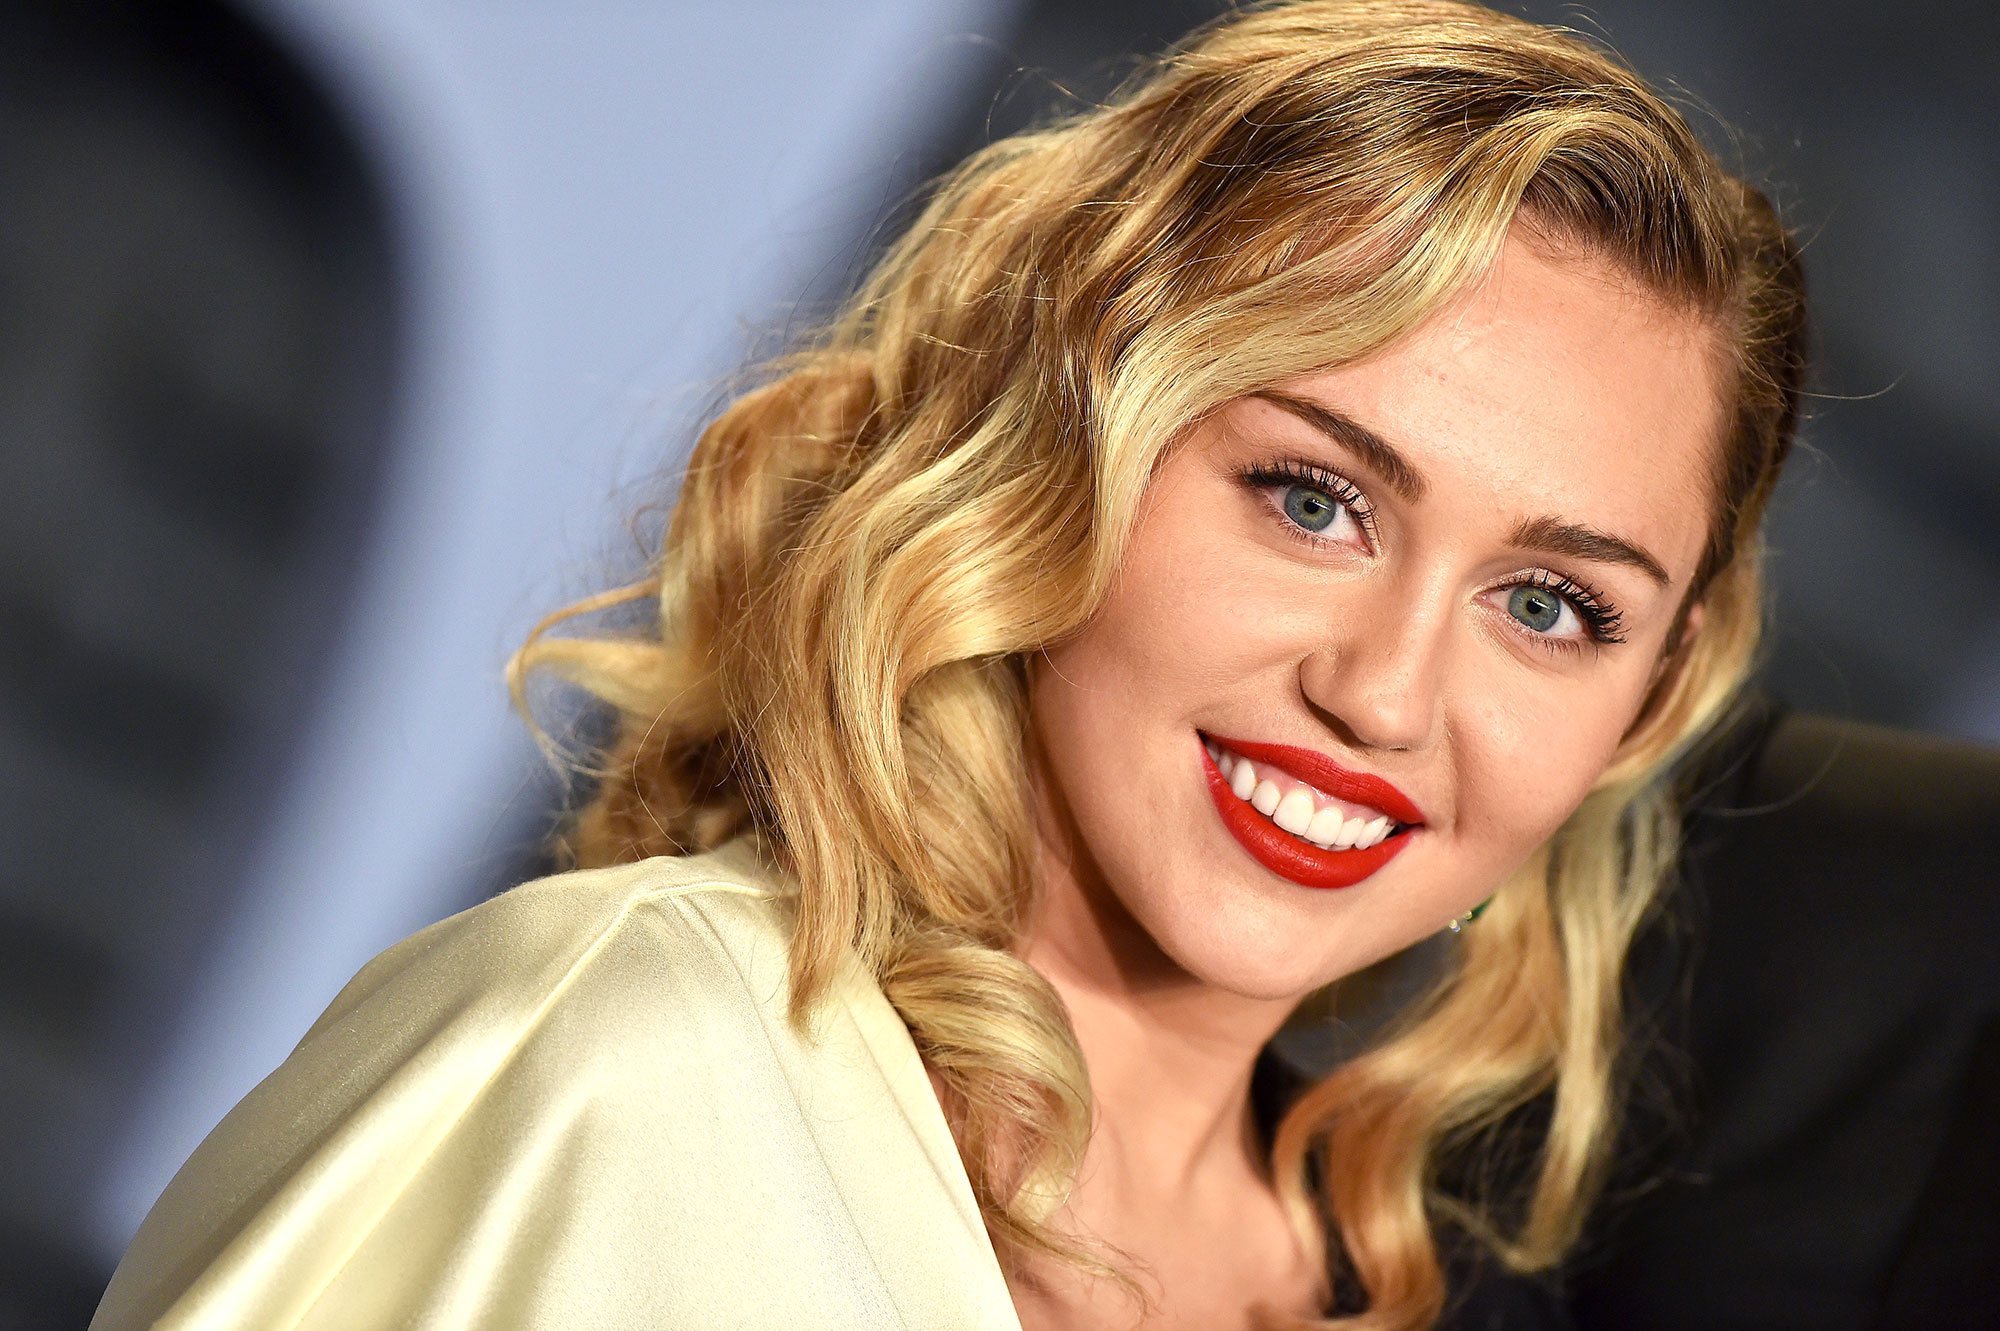 Miley Cyrus Has Had Sex - Miley Cyrus' Dating History: Timeline of Her Famous Exes, Flings